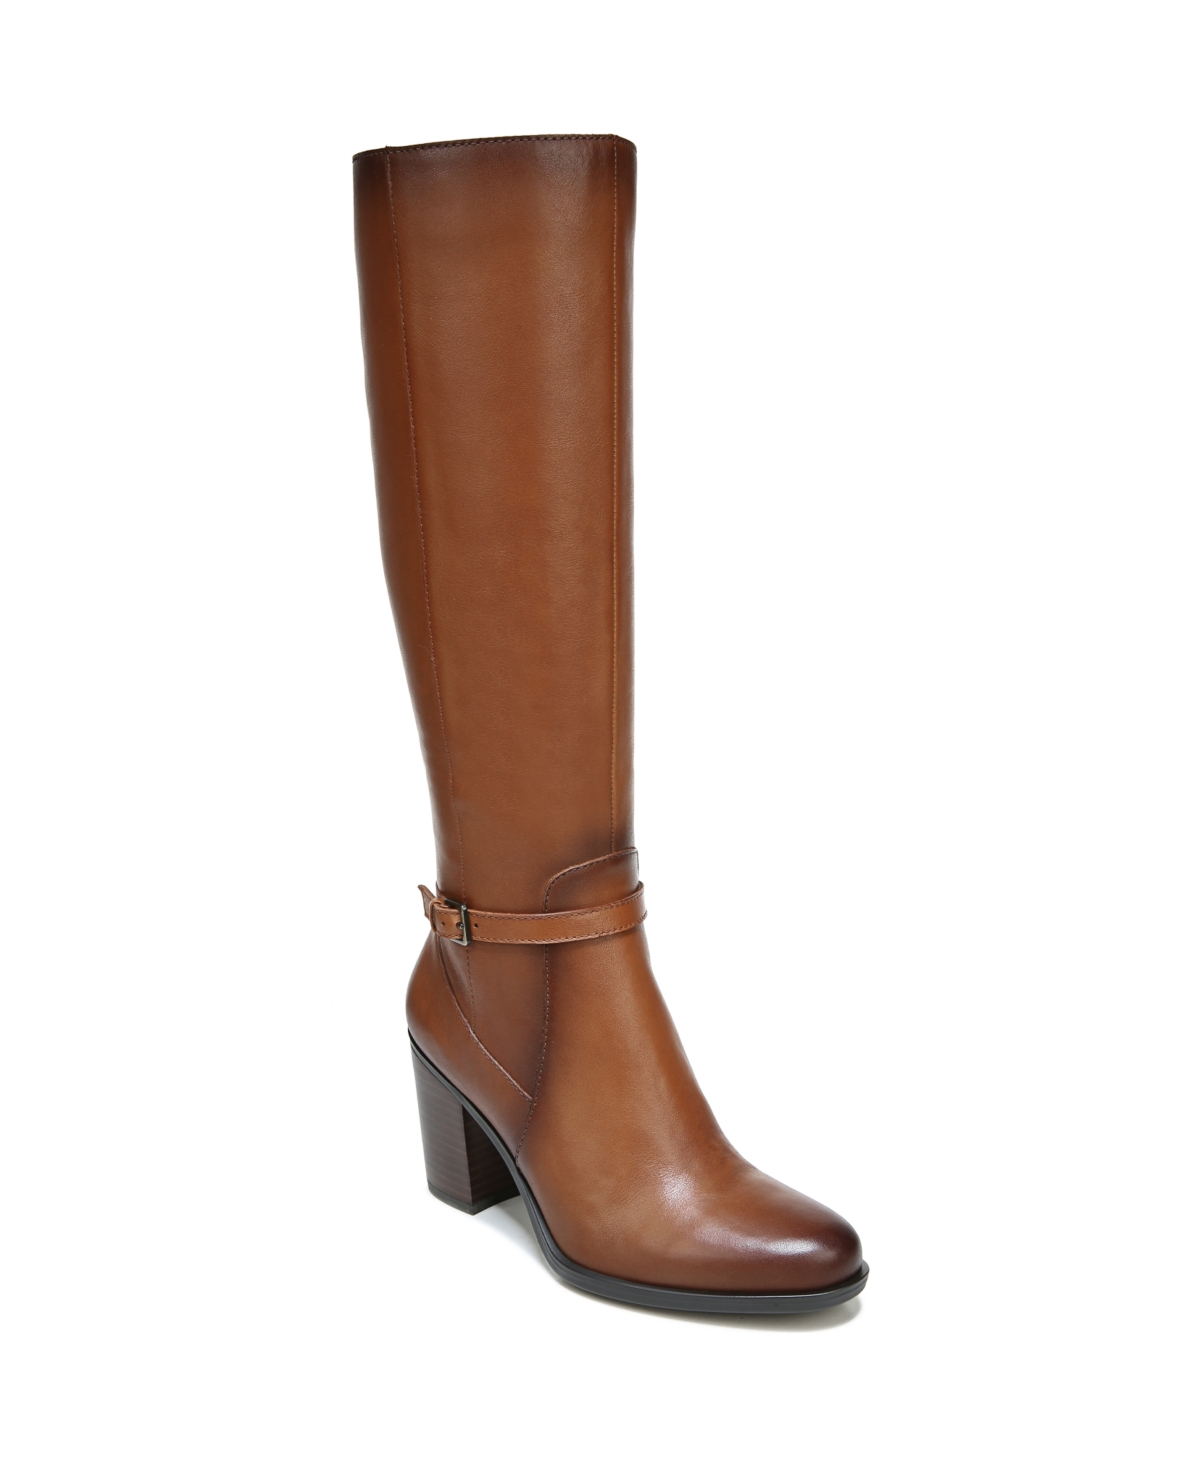 Shop Naturalizer Kalina Narrow Calf High Shaft Boots In Cider Spice Brown Leather